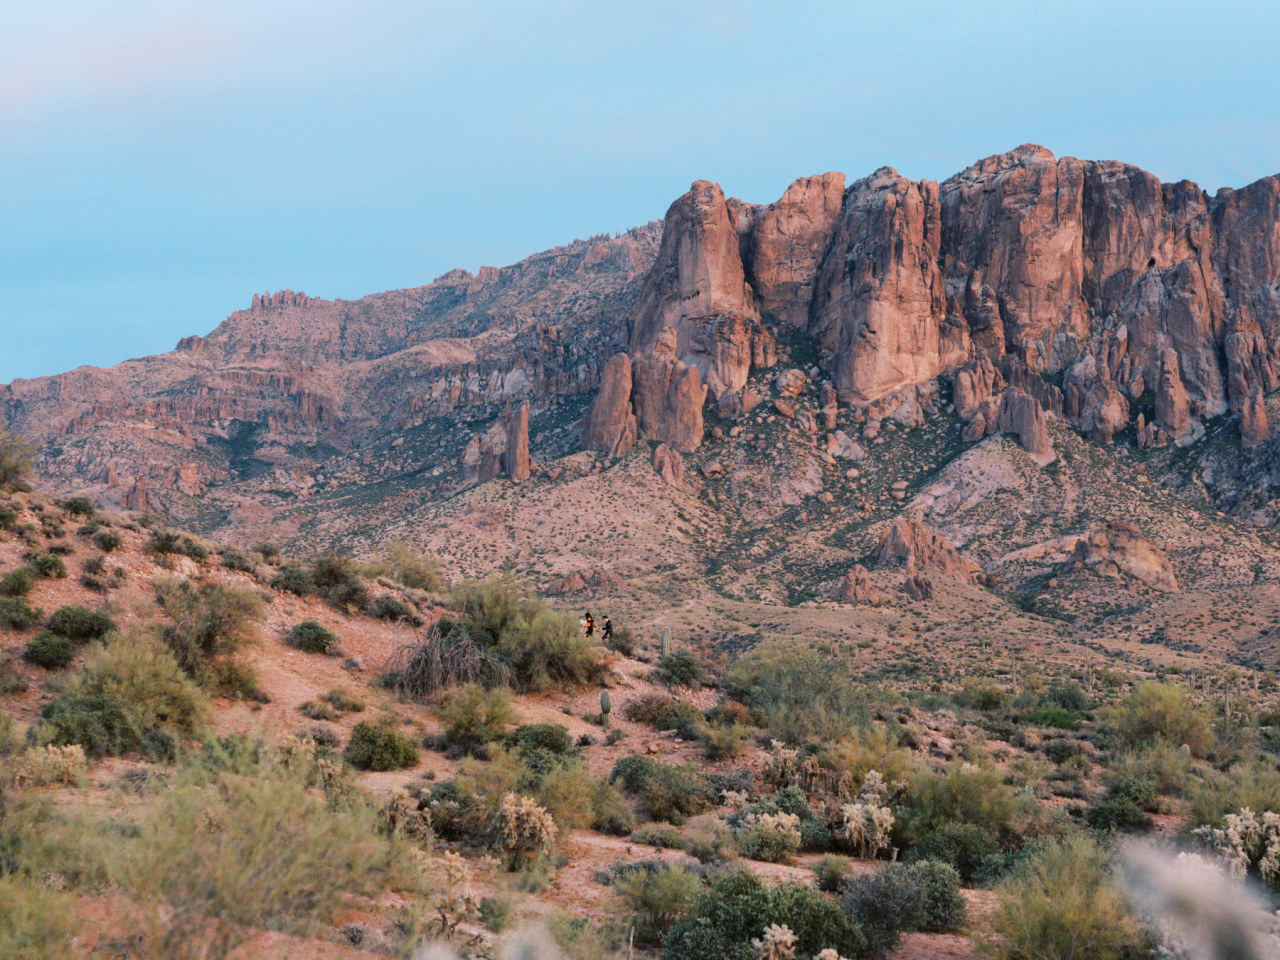 Superstition Mountain desert landscape with woman in man in far distance walking up slope.